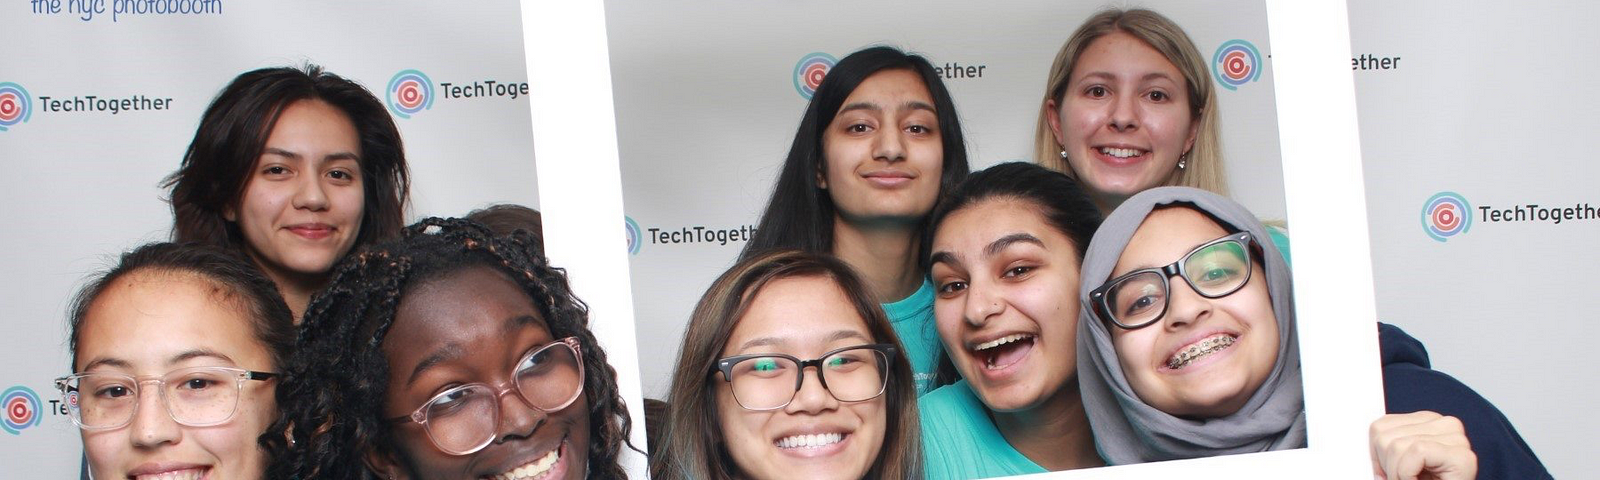 Photo from TechTogether Boston 2019.